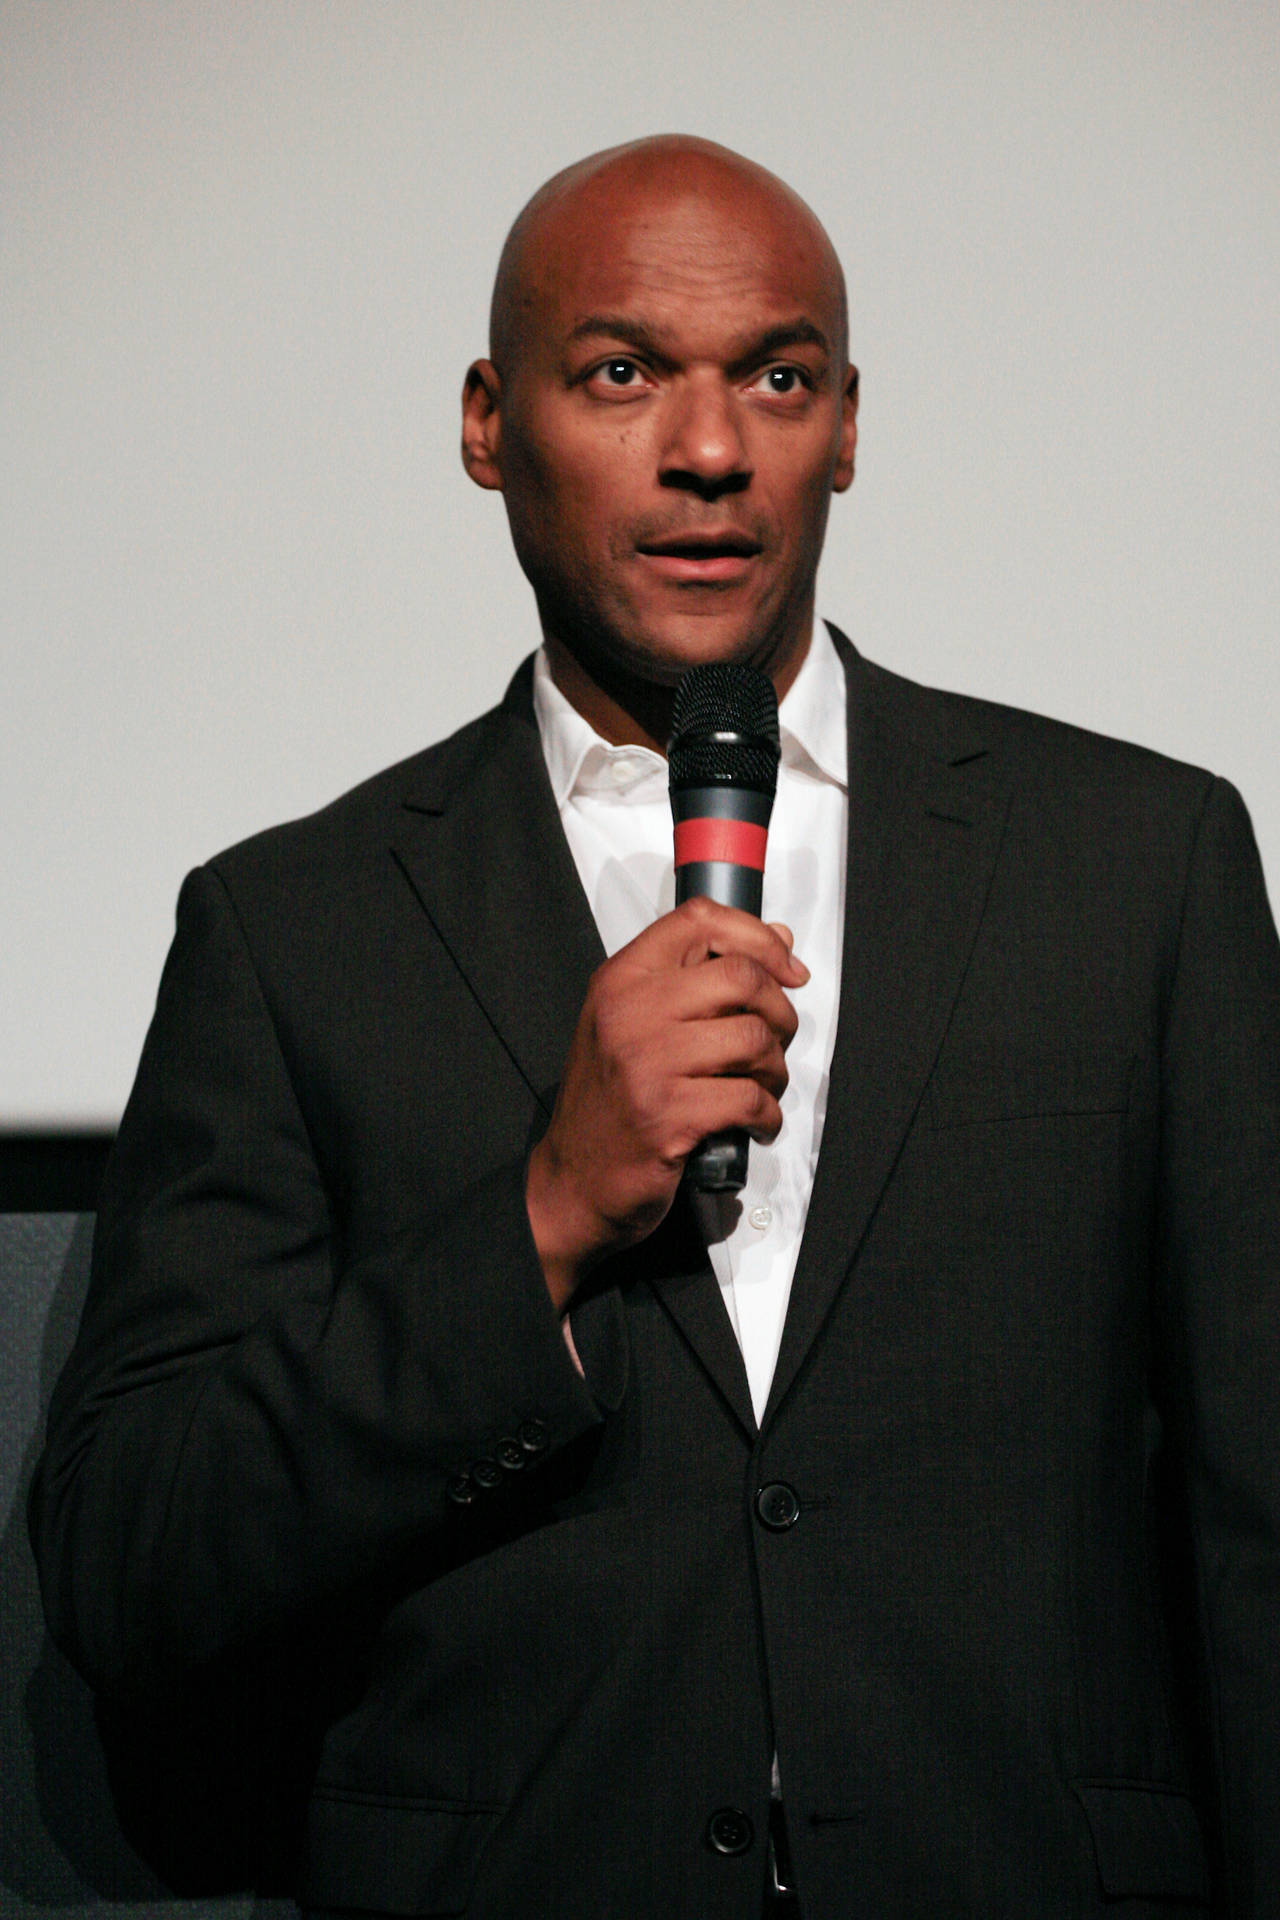 Colin Salmon Holding Microphone Wallpaper